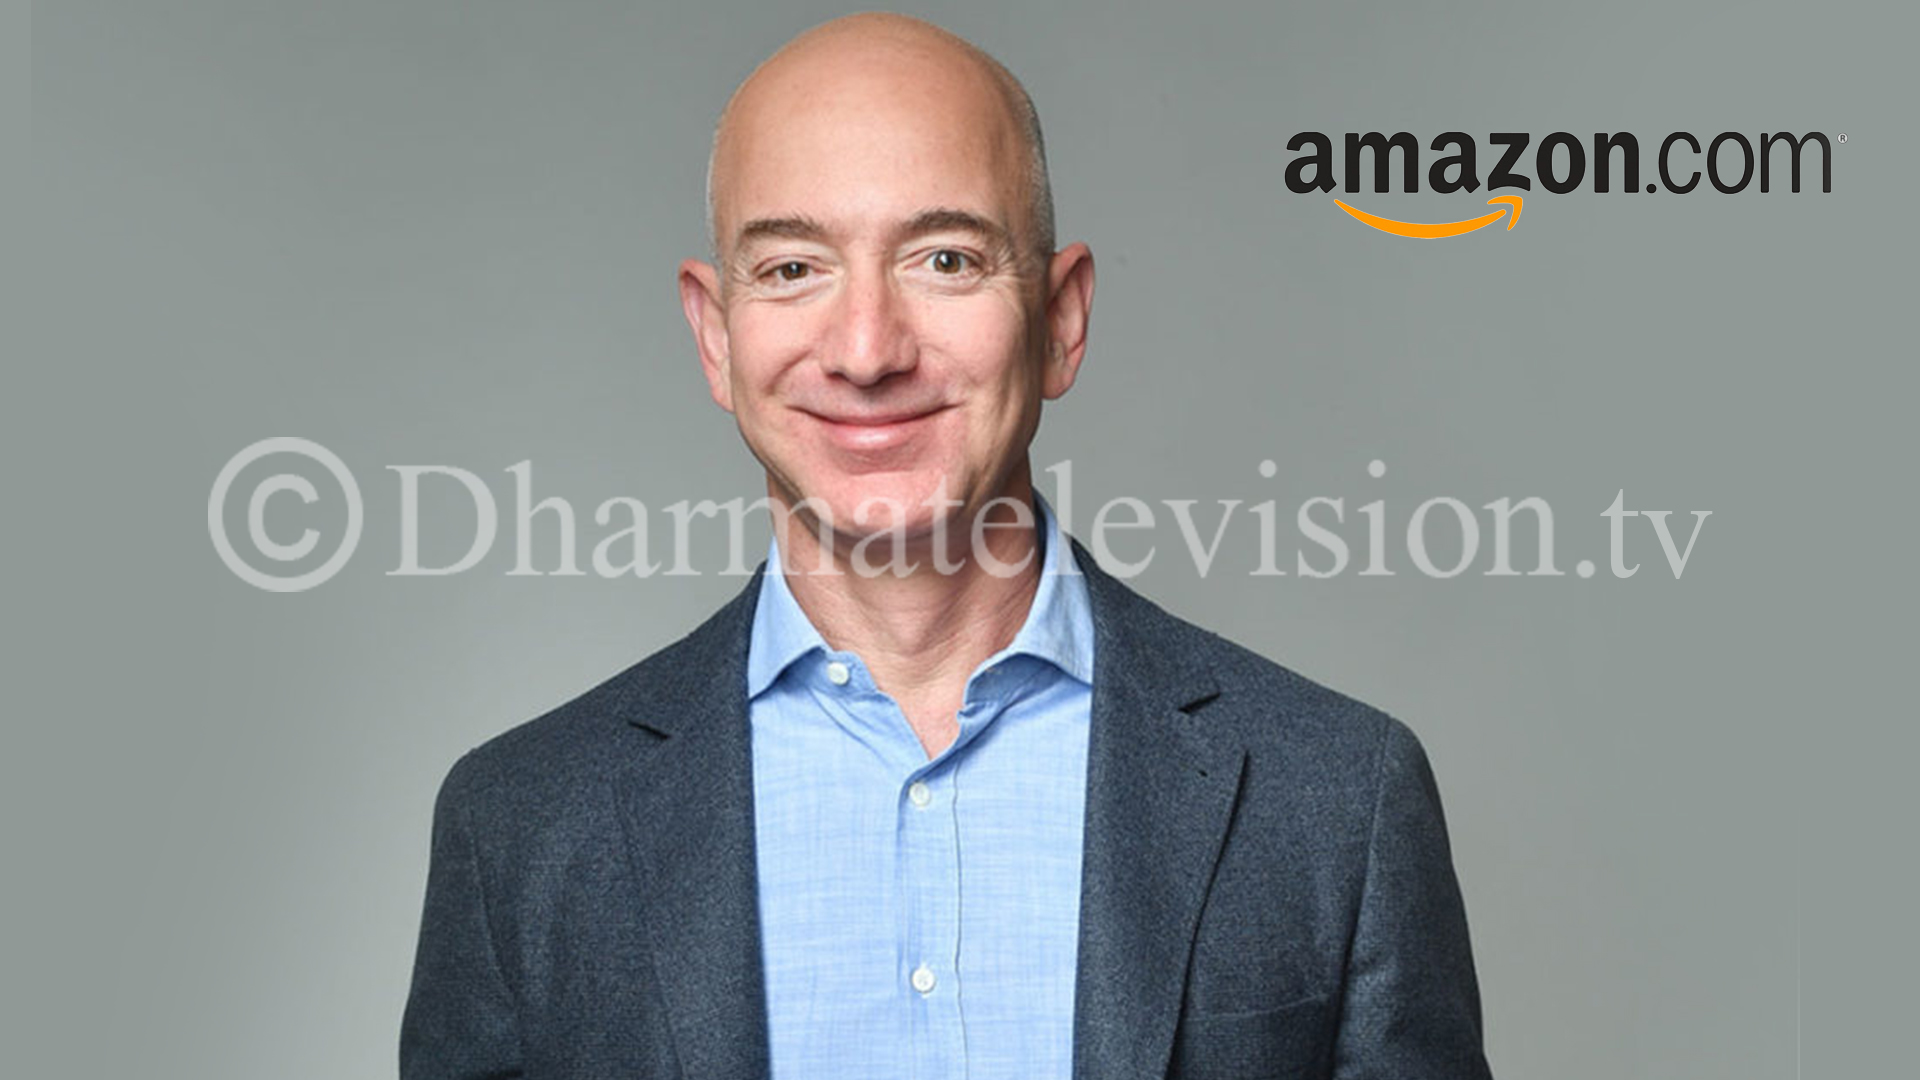 World’s Richest Person, Jeff Bezos, adds record $13 billion in single day to his wealth